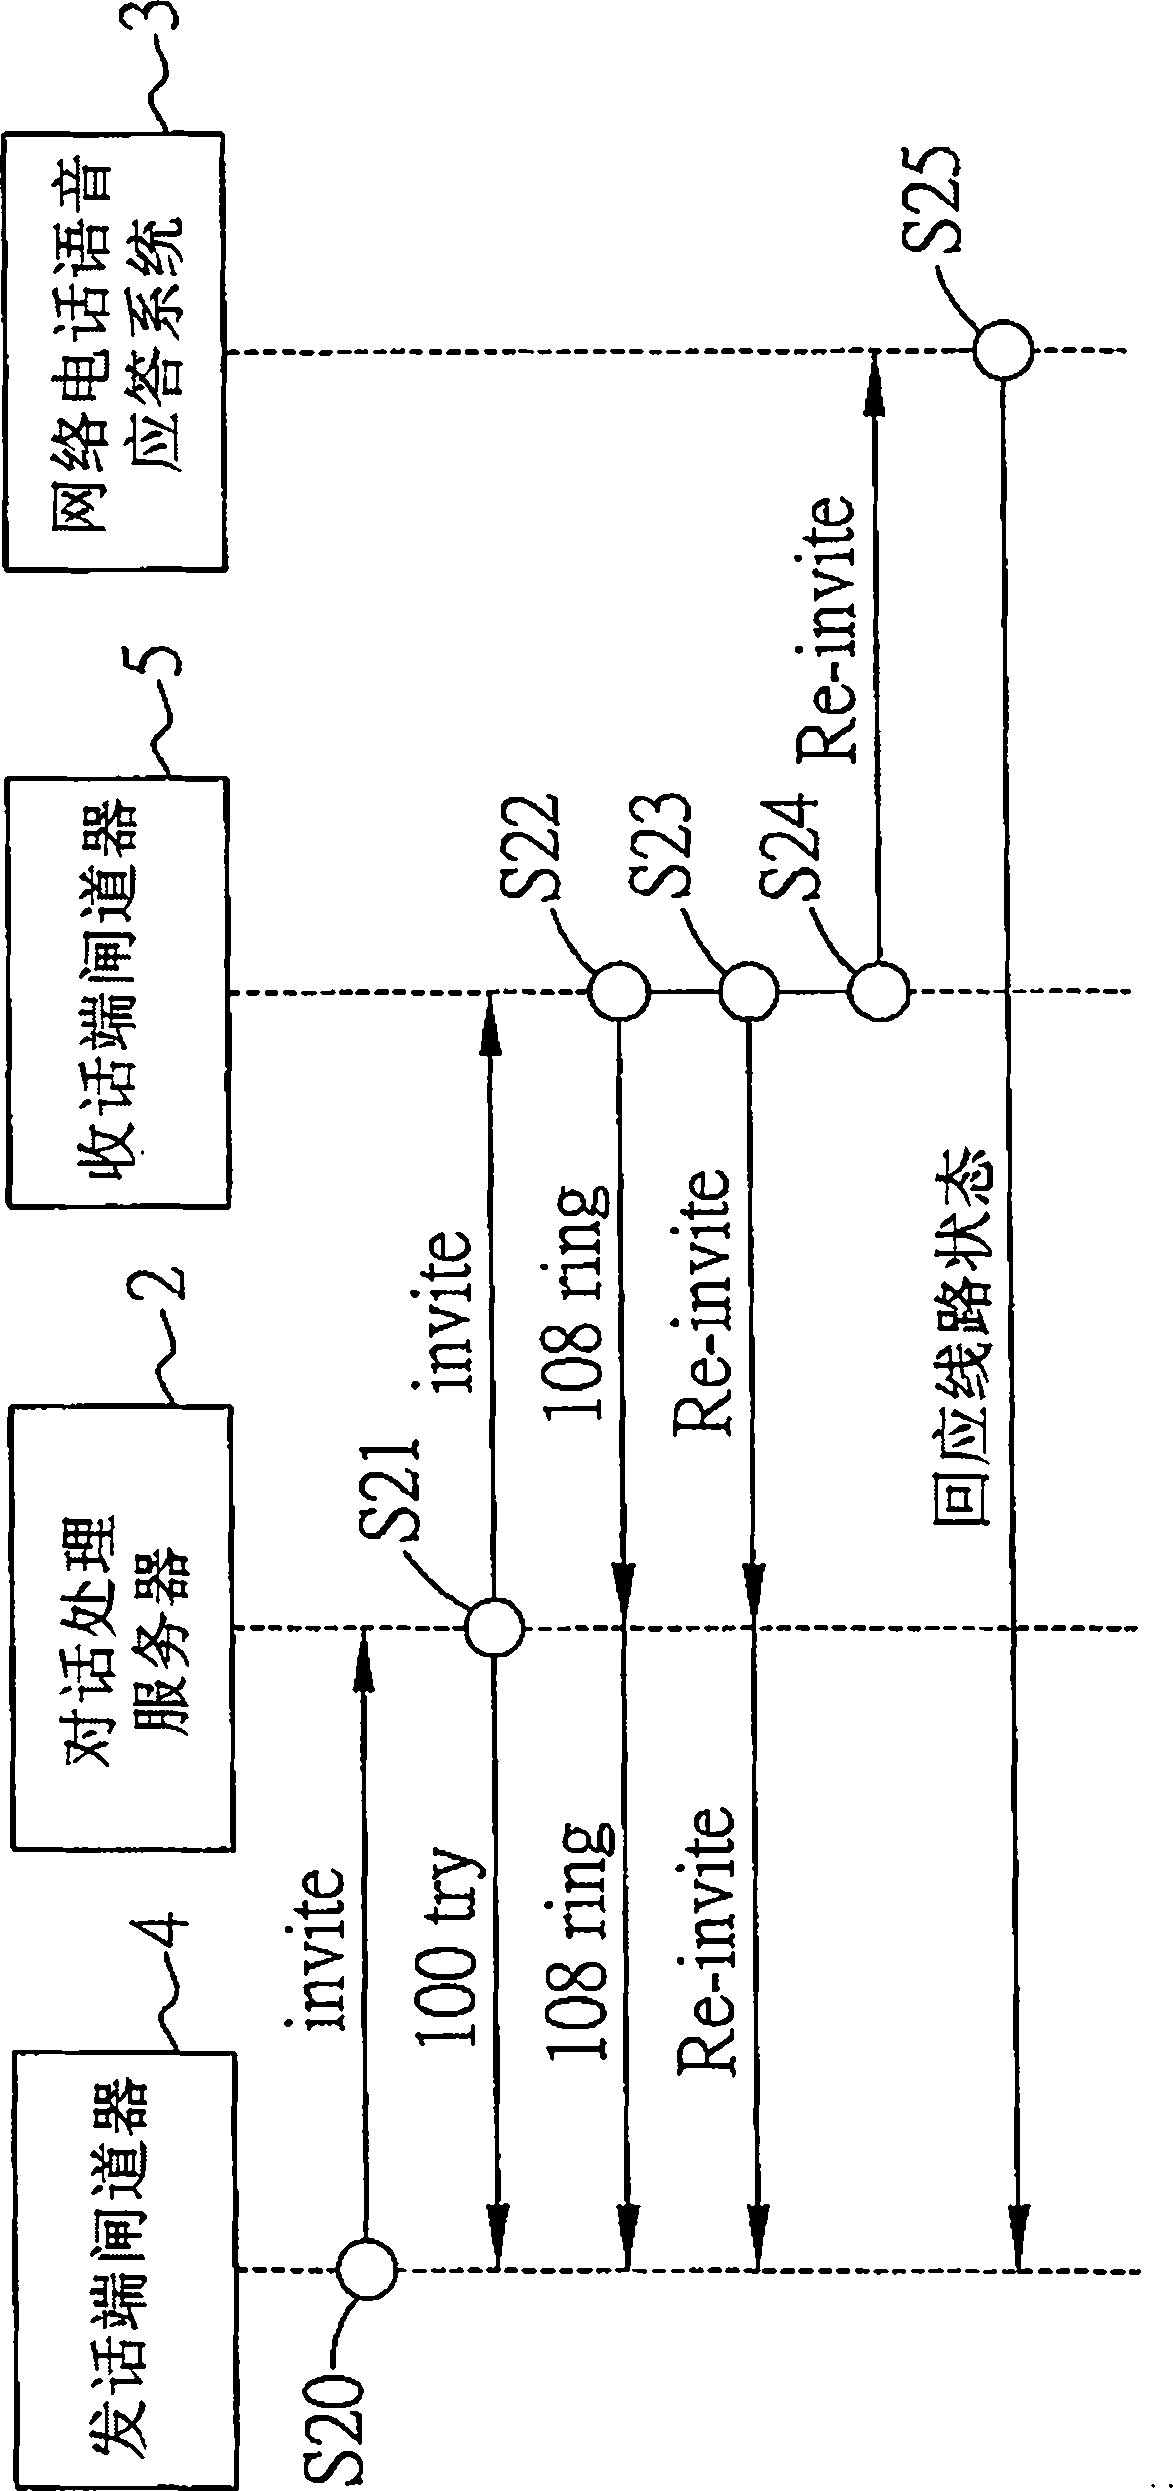 VoIP voice response system and method